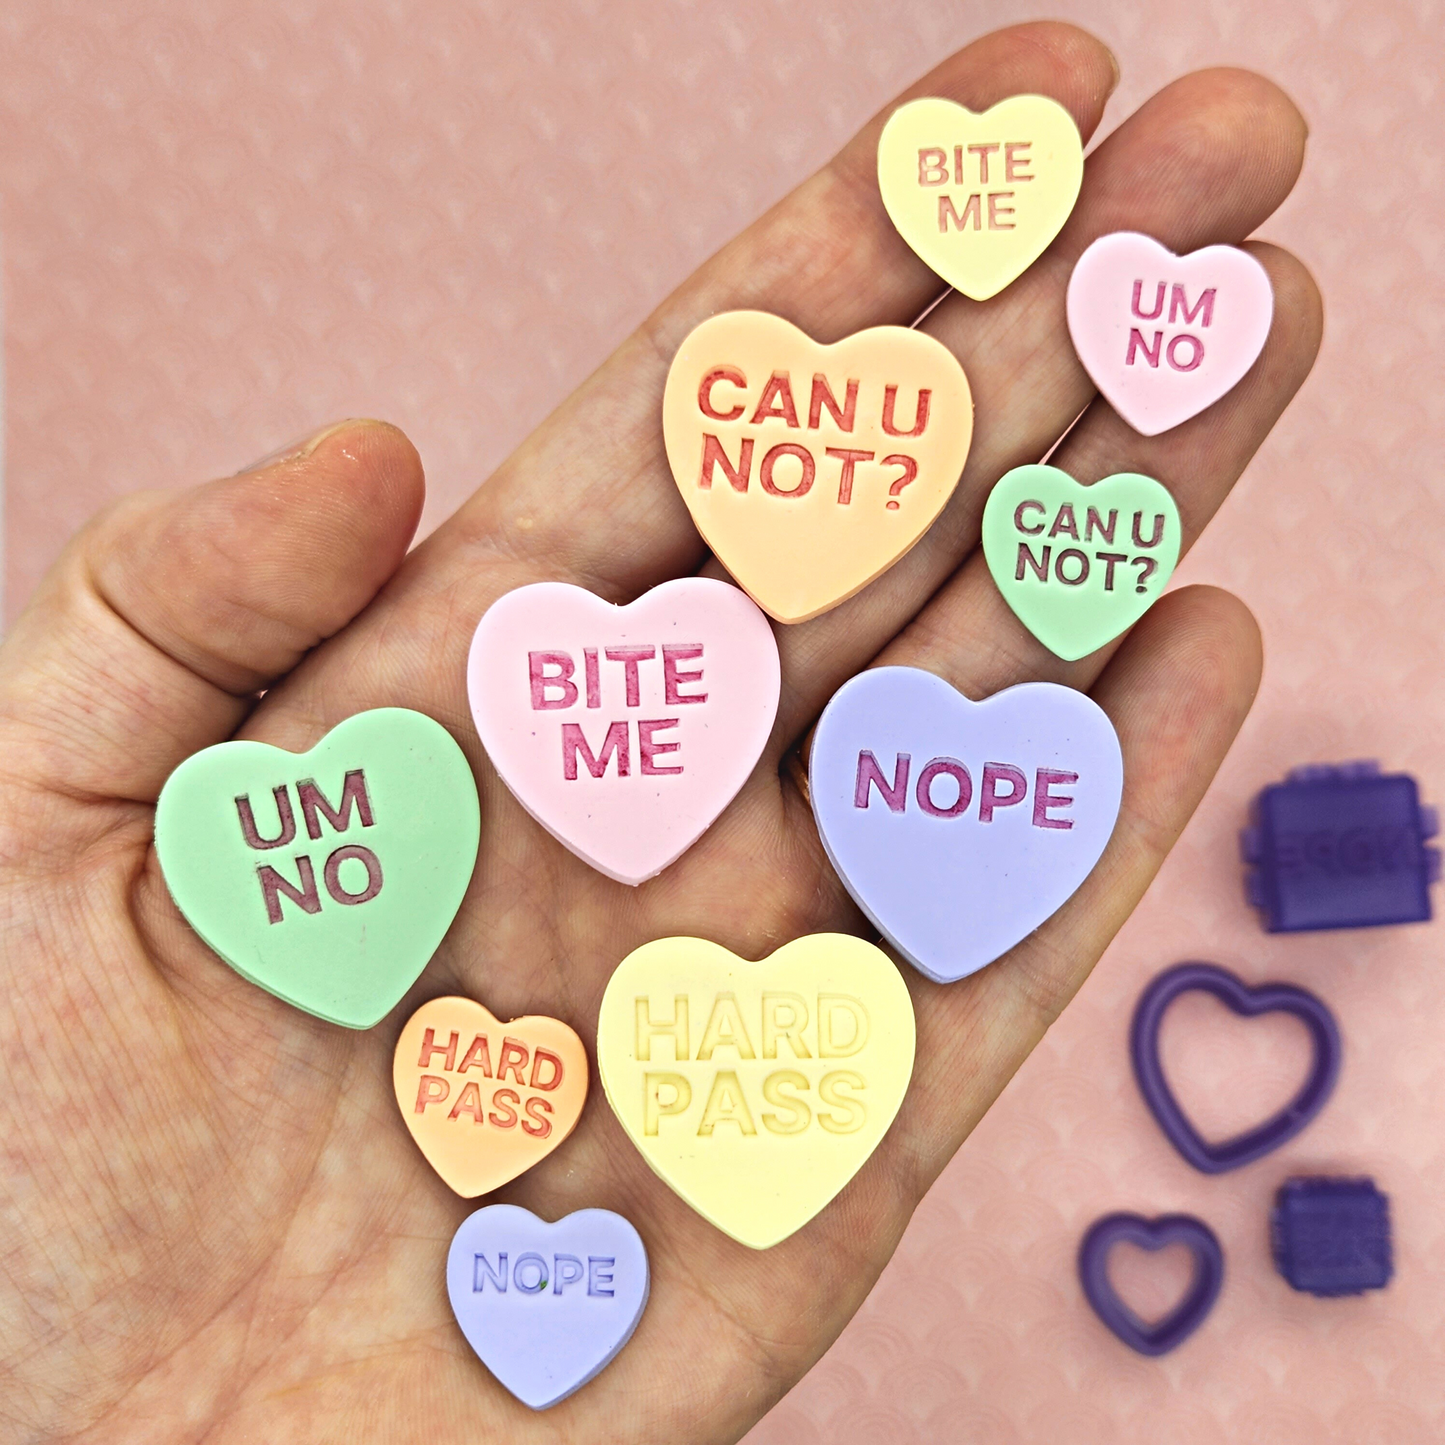 candy conversation hearts on polymer clay with words "CAN U NOT?", "BITE ME", "UM NO", "NOPE", and "HARD PASS". Sample finish product